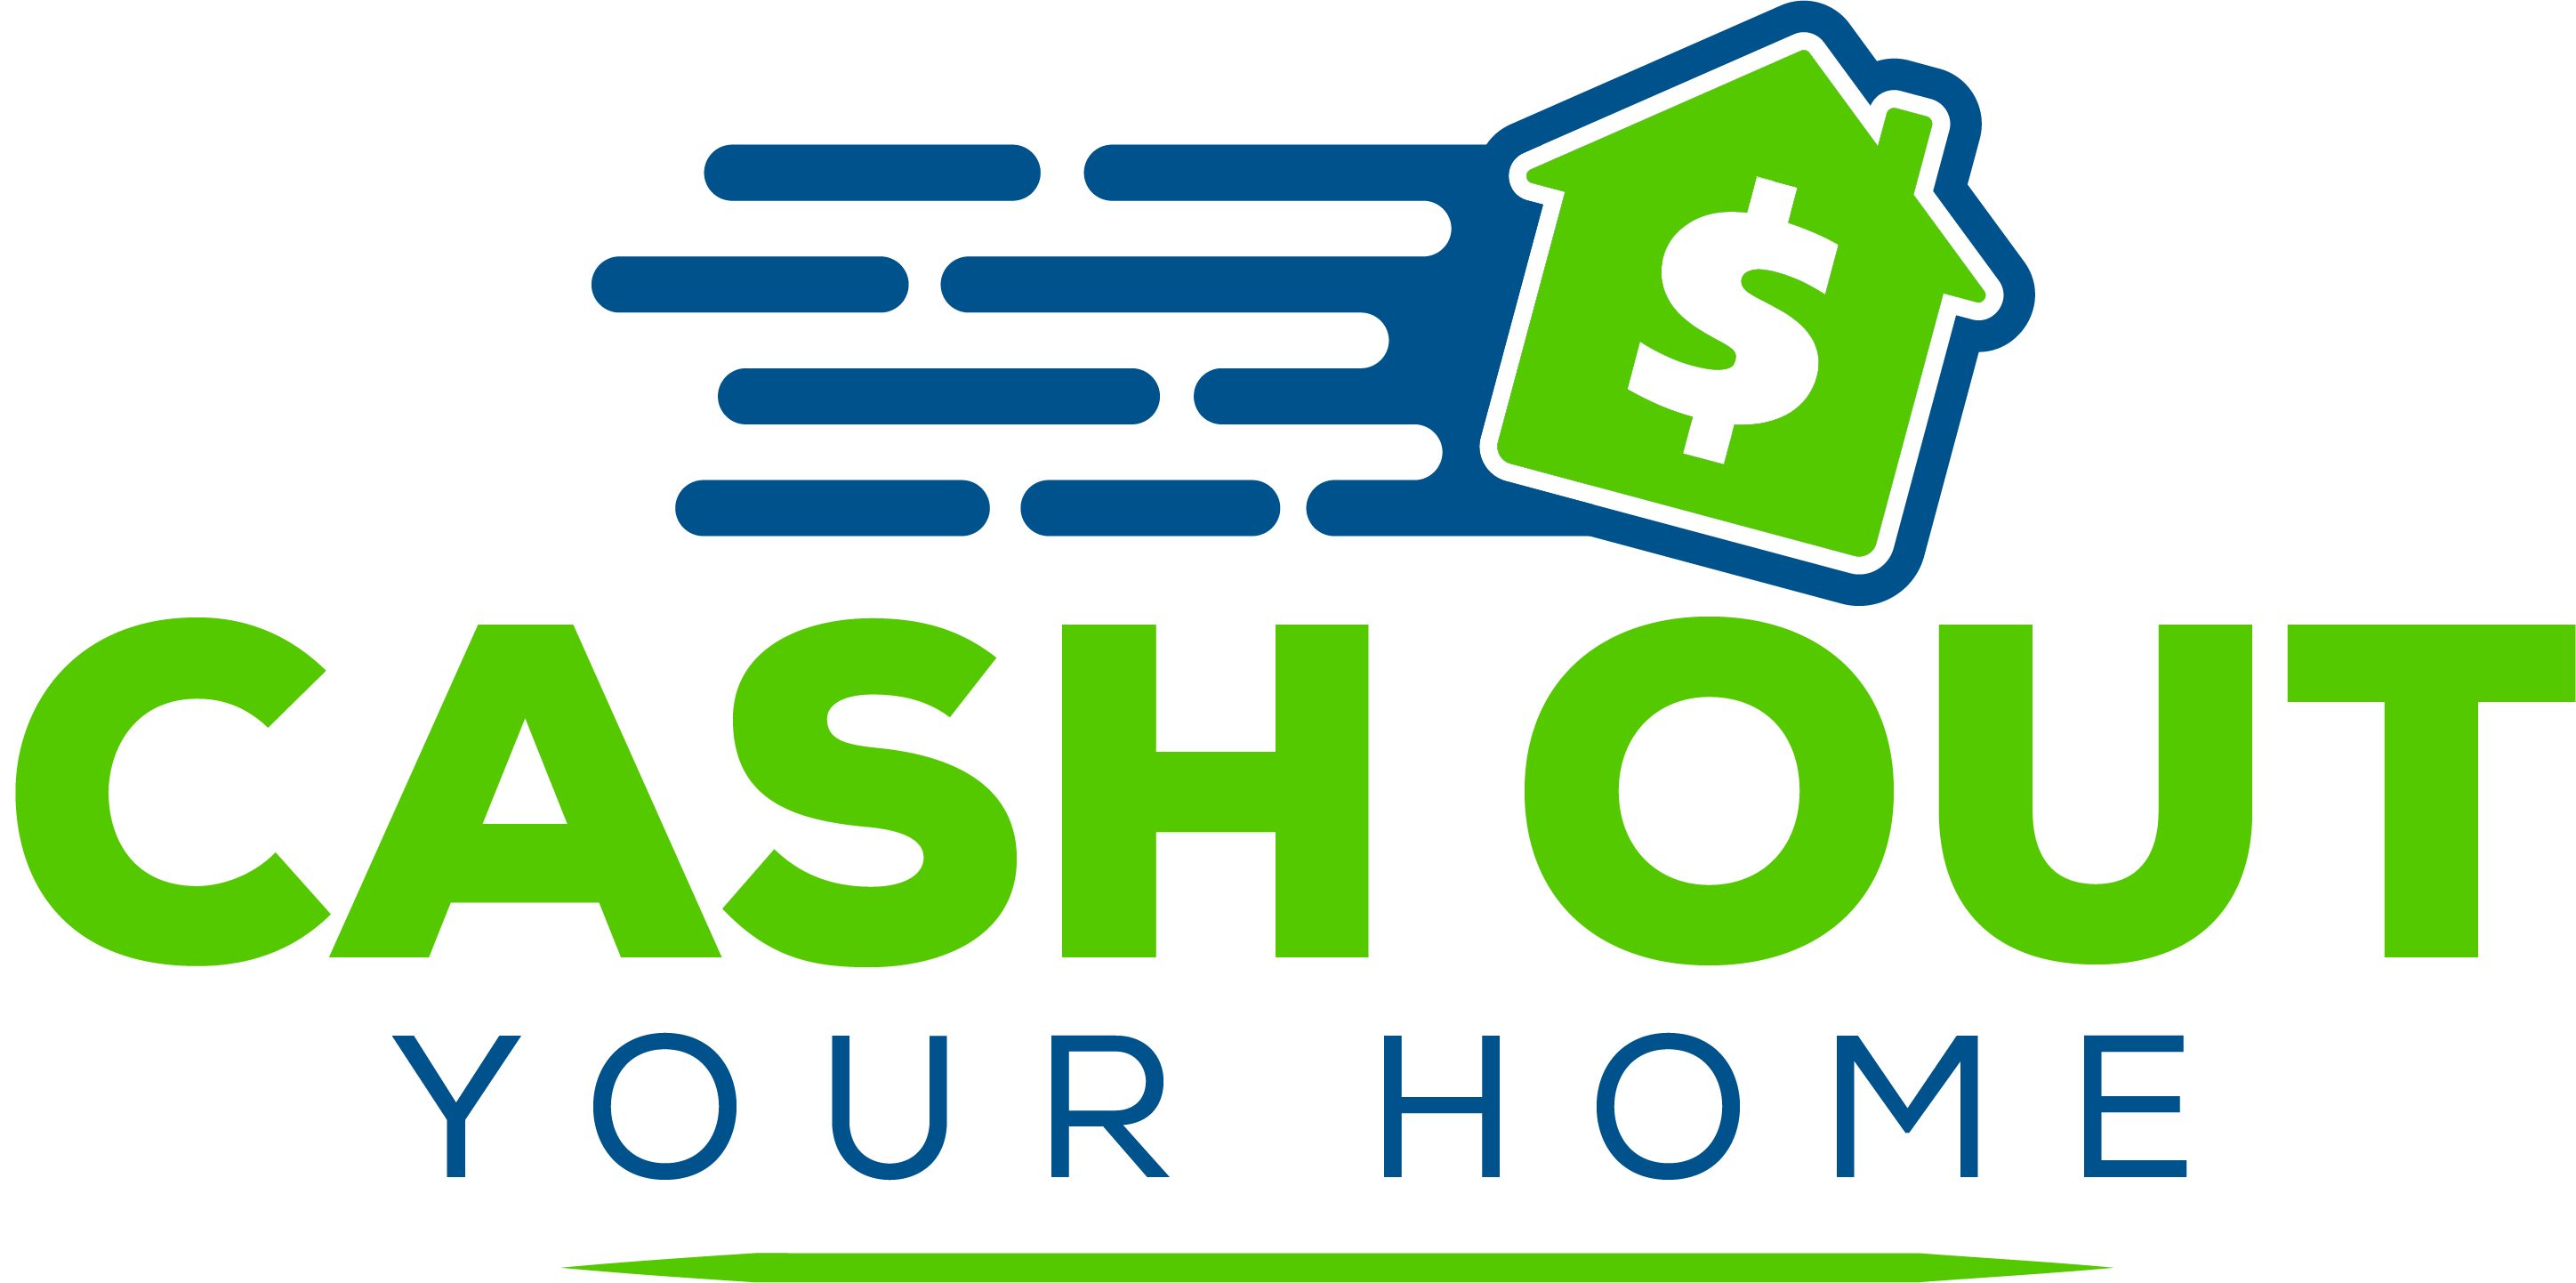 Cash Out Your Home logo